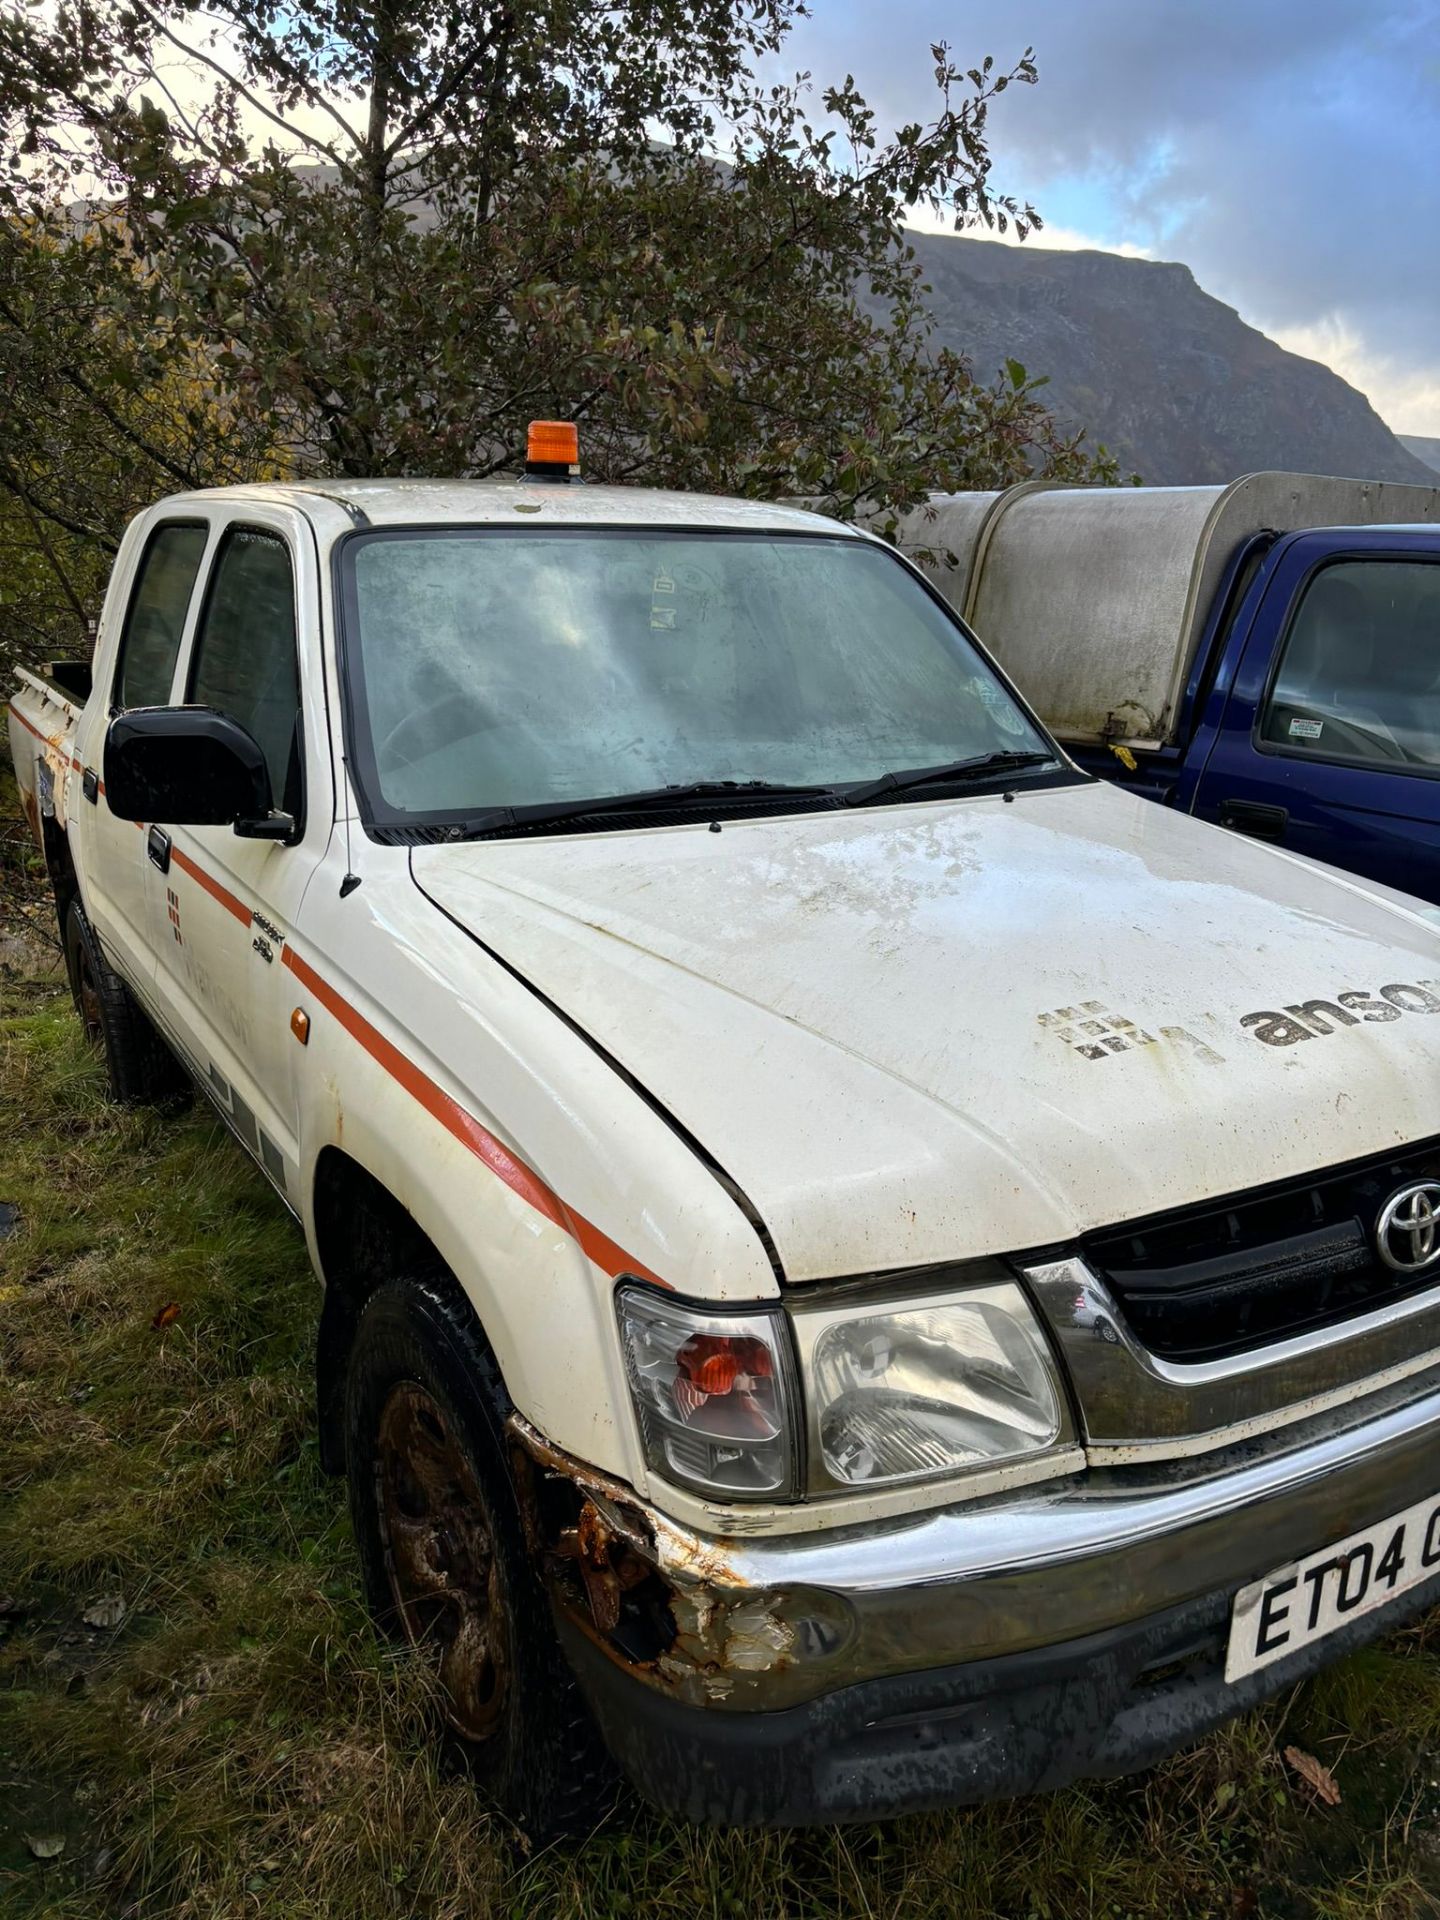 TOYOT HILUX DOUBLE CAB PICKUP TRUCK 2004 4X4 - Image 4 of 4